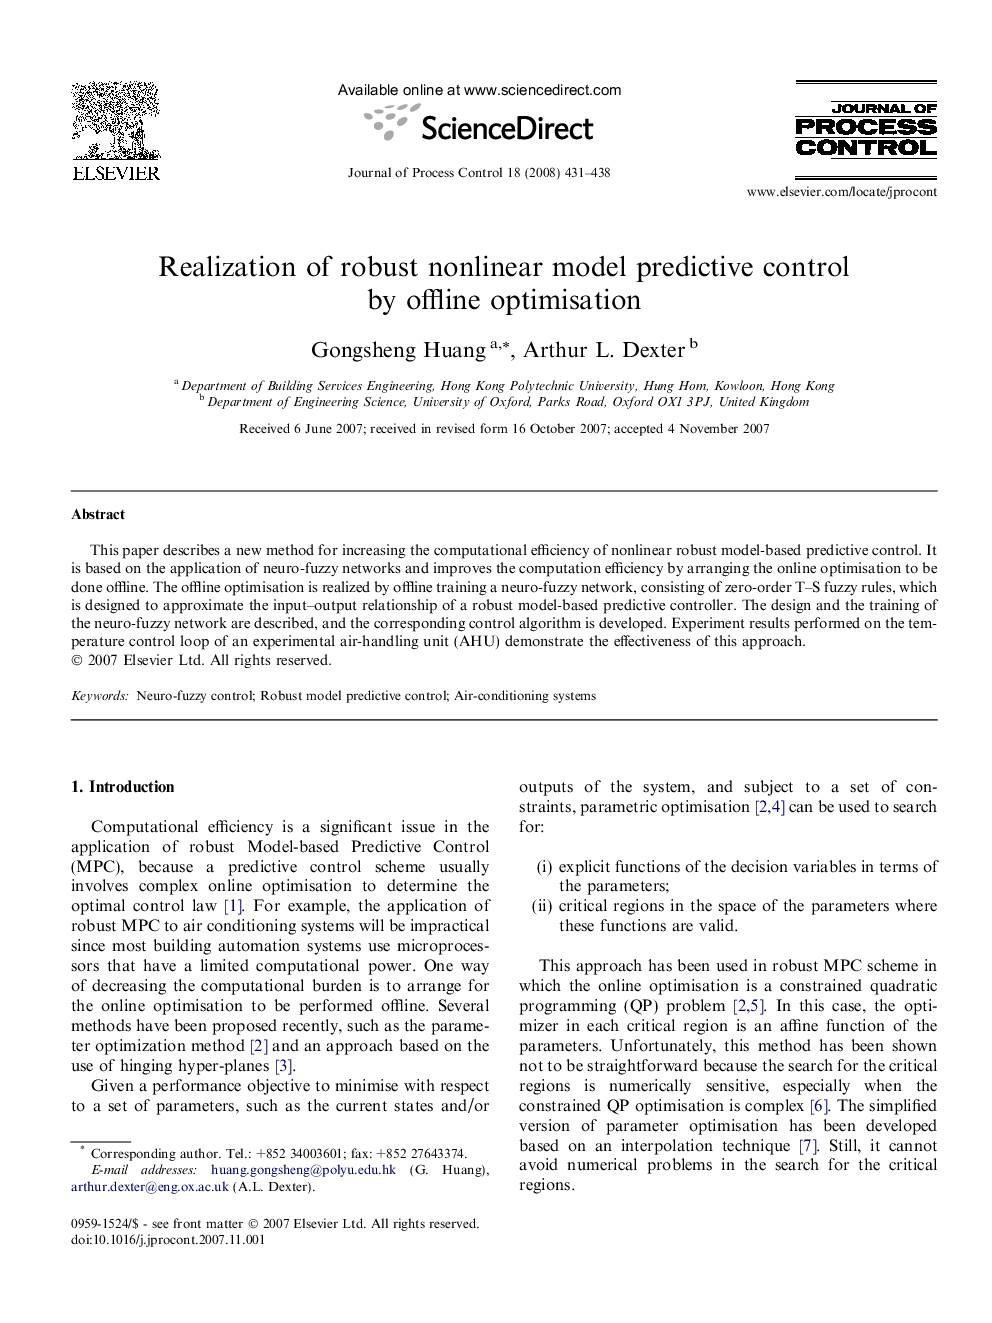 Realization of robust nonlinear model predictive control by offline optimisation